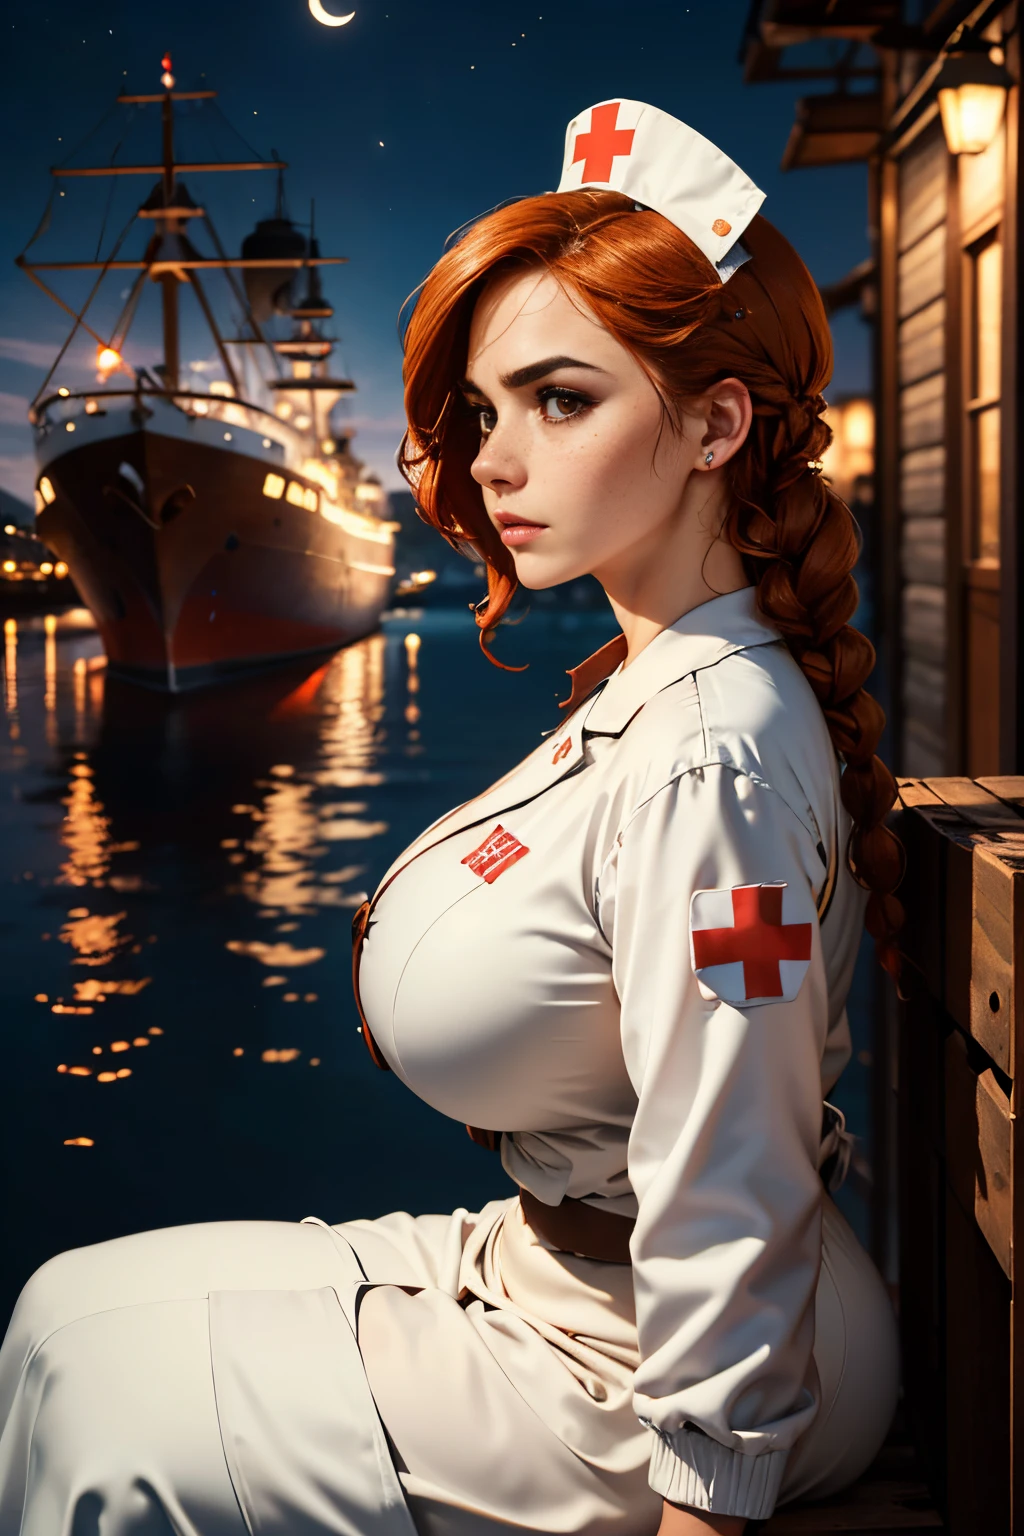 a picture of 1 woman, set in a harbour at night, a 40-year- old Scottish female nurse in world war 2 style, sitting on a wooden crate, sideview shit, profile, midnight, ship in the background, moon, tense atmosphere. She has has copper red hair, tied up to a braid, ((brown eyes)), downturned eyes, high cheekbones, strong eyebrows, freckles, strong jaw, strong face, quiet and thoughtful expression, white nurse outfit with white jacket and white skirt, white nurse headgear, red cross. Huge breasts, broad hips, hourglass figure, cinematic, UHD, masterpiece, anatomically correct, textured skin, natural blemishes , wrinkles,super detail, high quality, best quality, award winning, highres, 16k, HD,